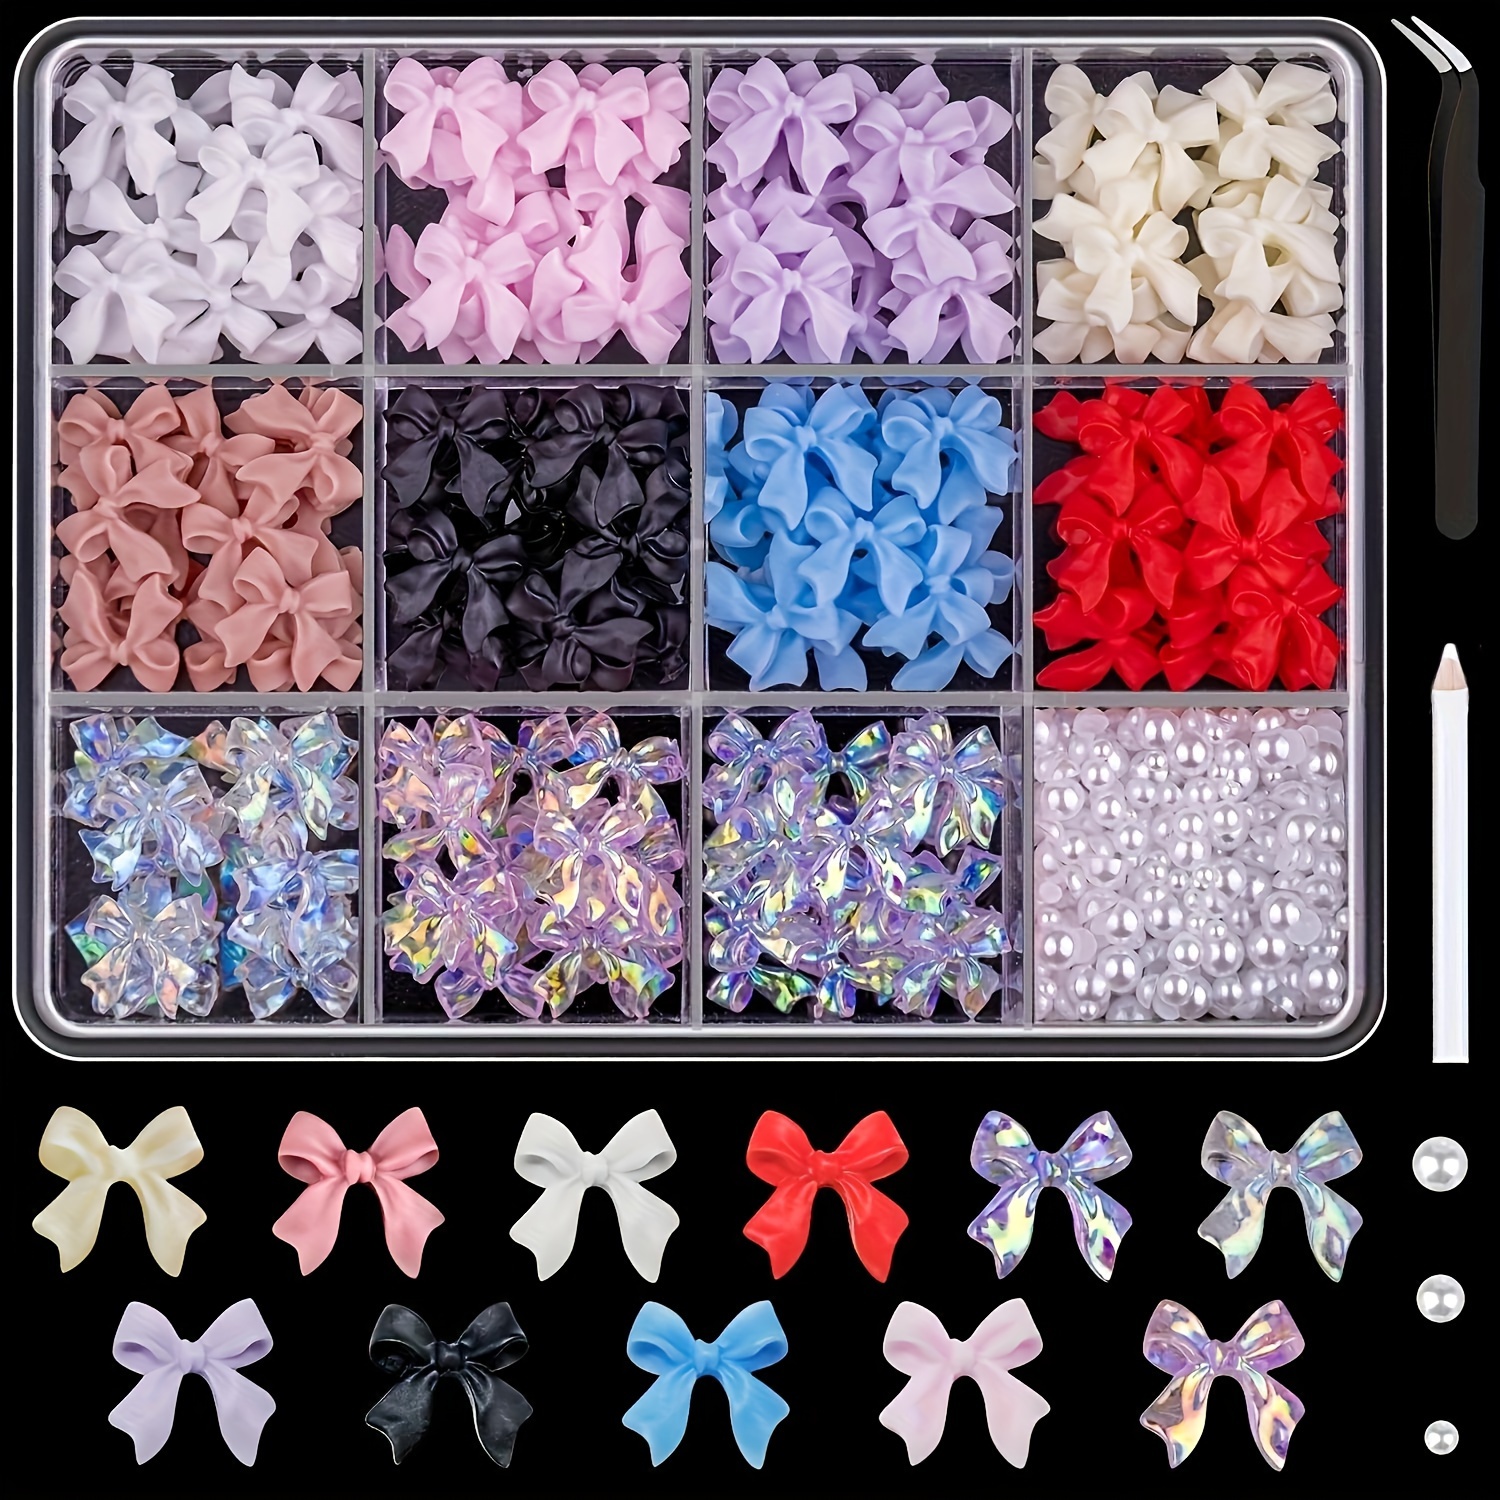 

500 Pcs 3d Nail Charms And Flatback Pearls Multi Styles Bowknot Charms + Pink&white Star Heart Nail Jewels + 2-6mm White Nail Pearls For Nail Art Design With Pickup Tools